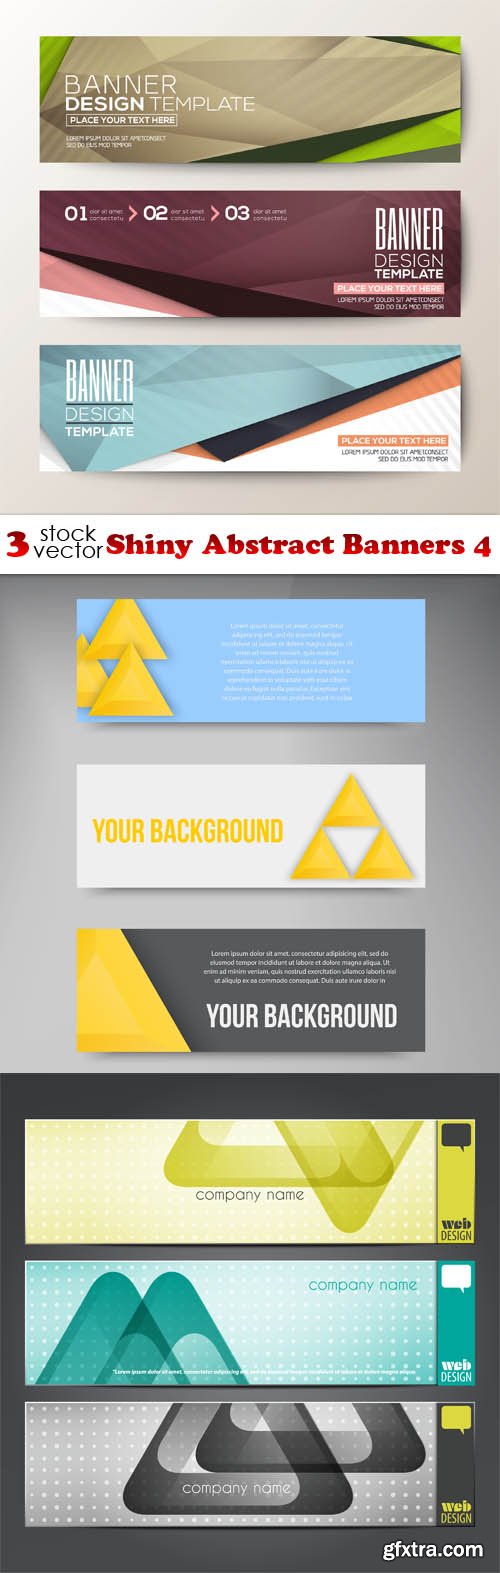 Vectors - Shiny Abstract Banners 4